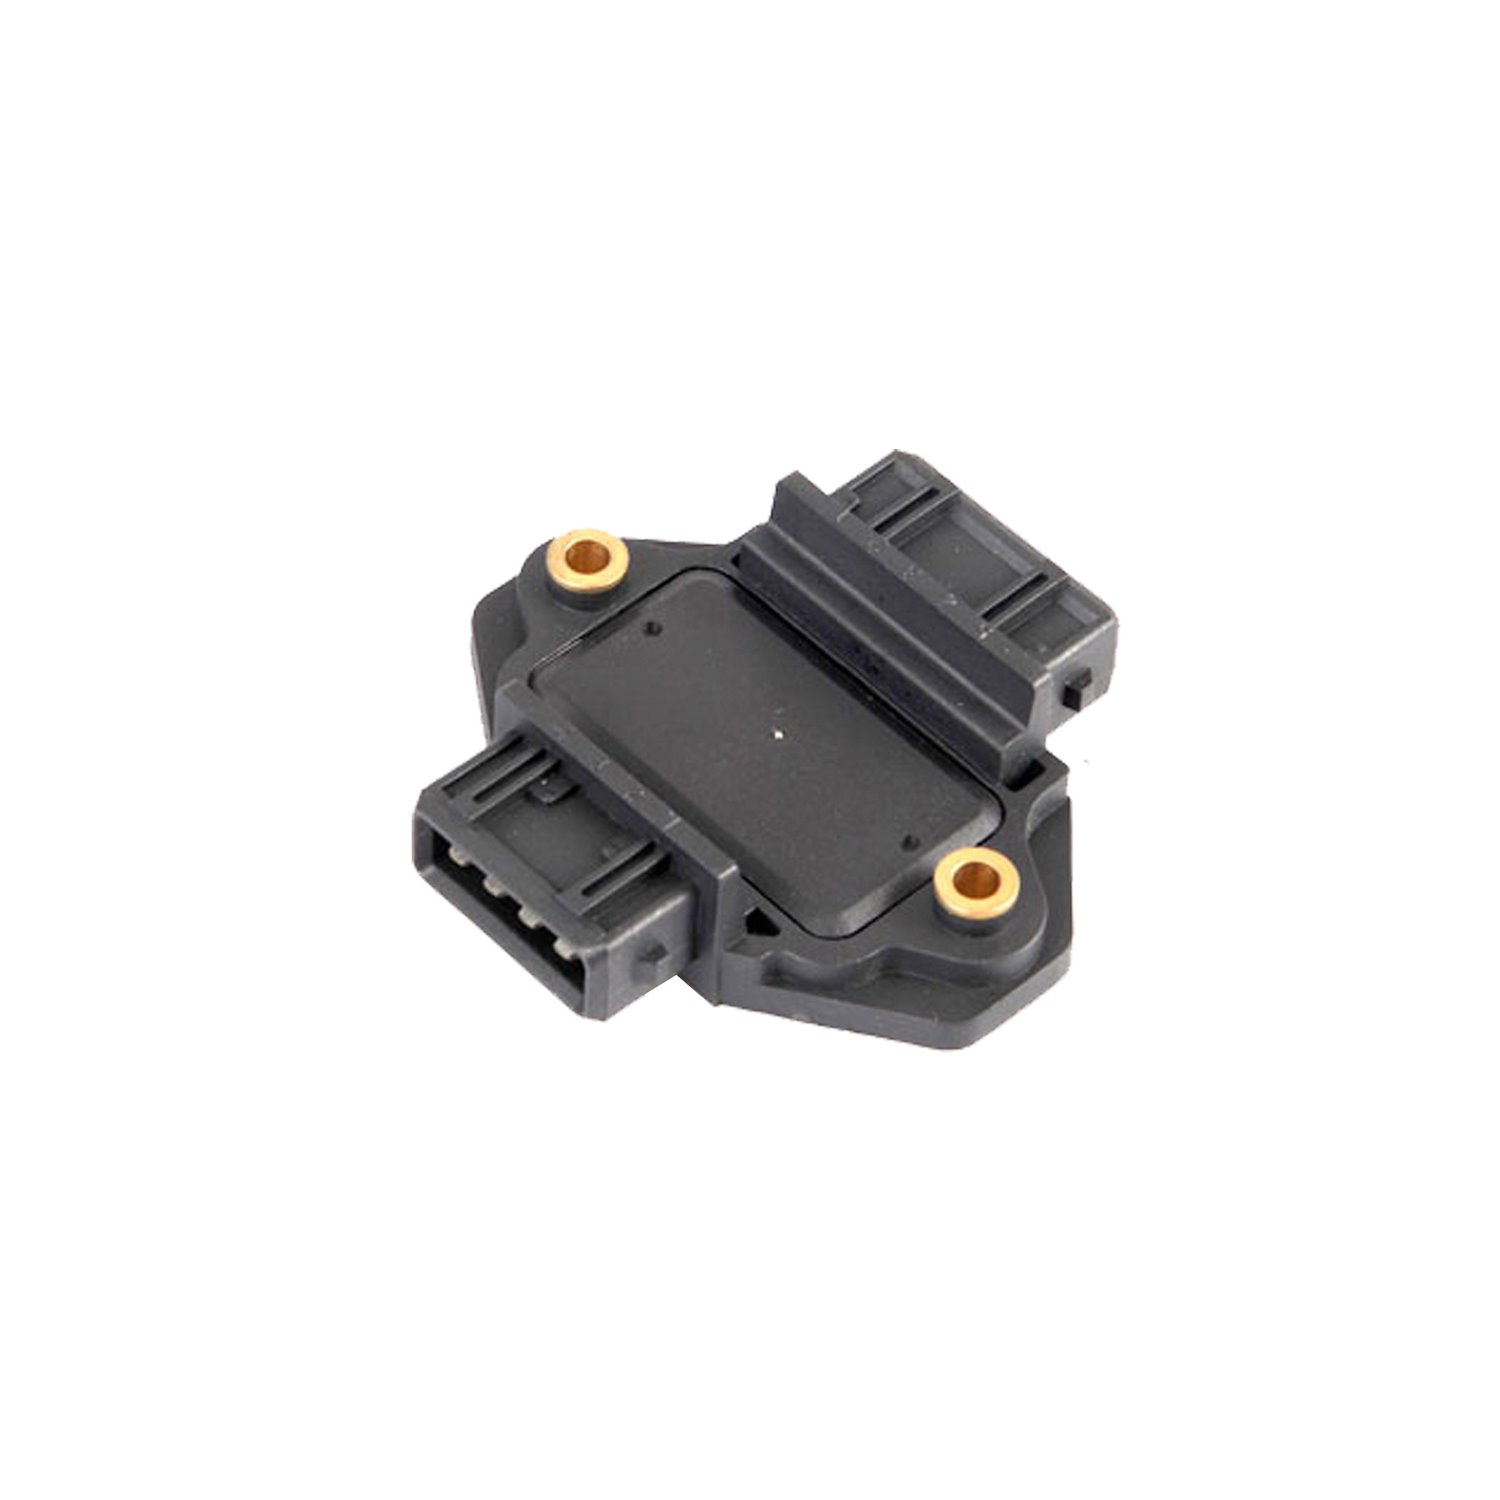 OE Replacement Ignition Control Module for Audi/Volkswagen